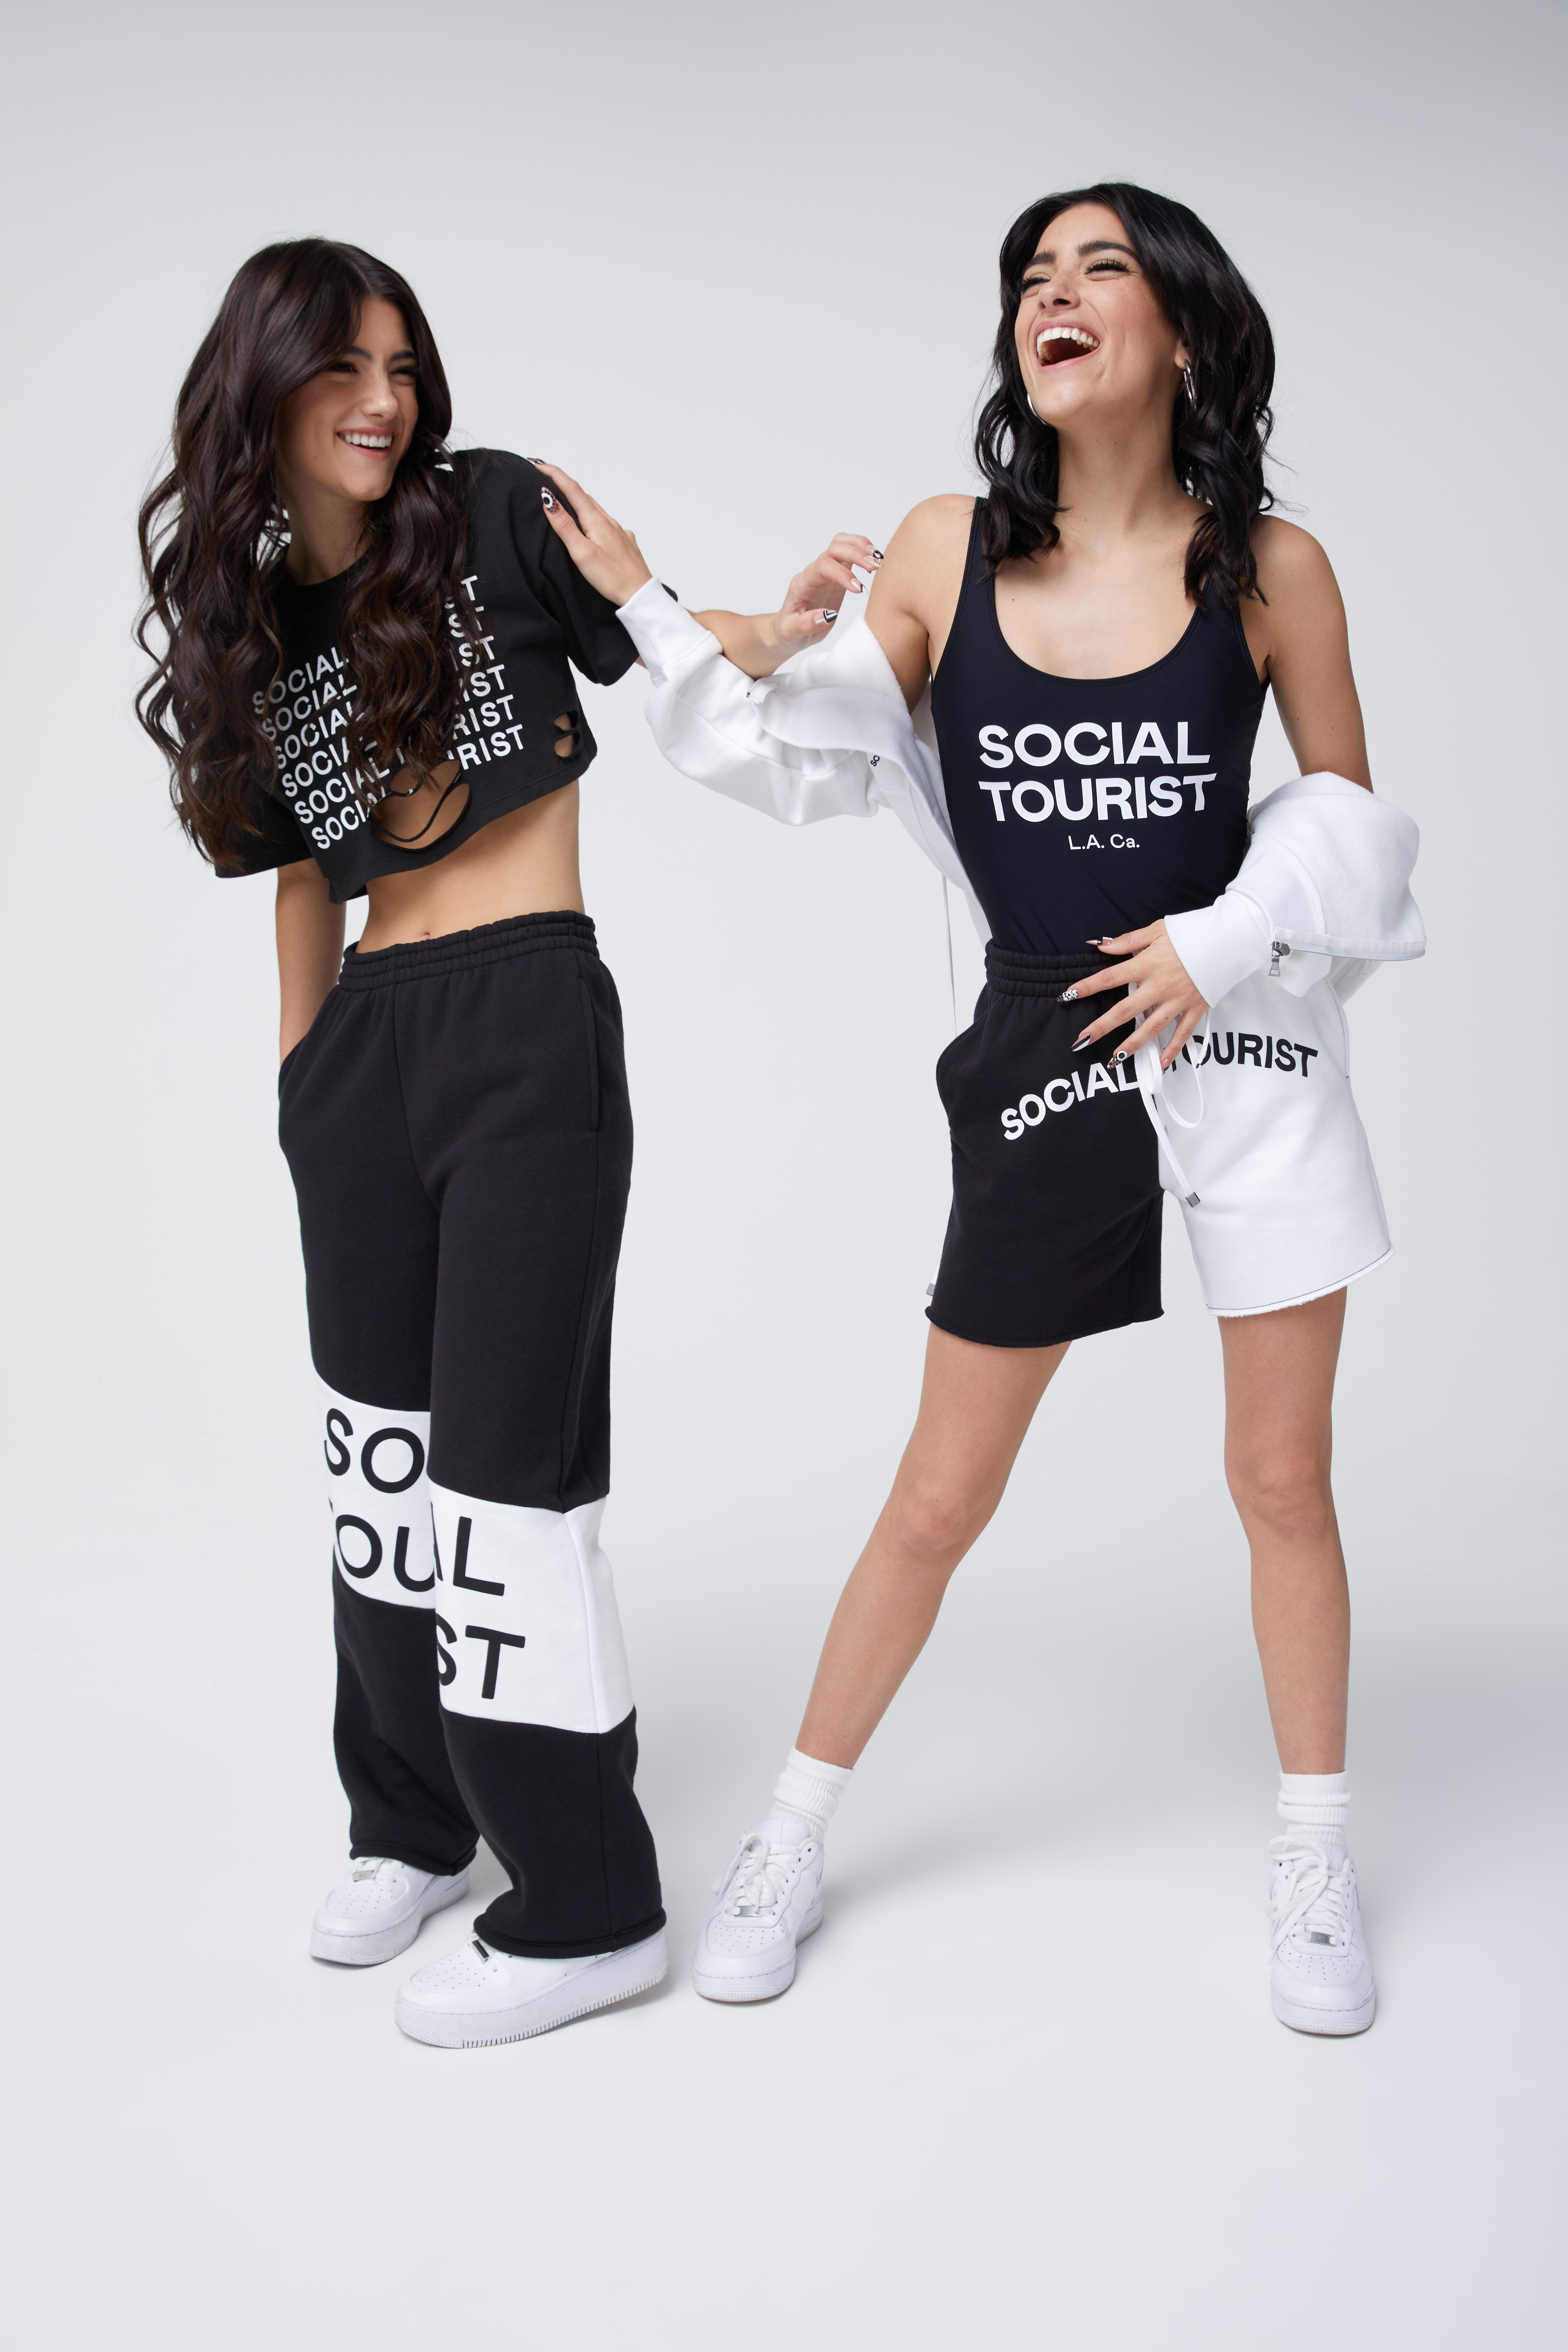 Charli and Dixie D'Amelio and Hollister Co. Launch New Fashion Brand,  Social Tourist - Licensing International